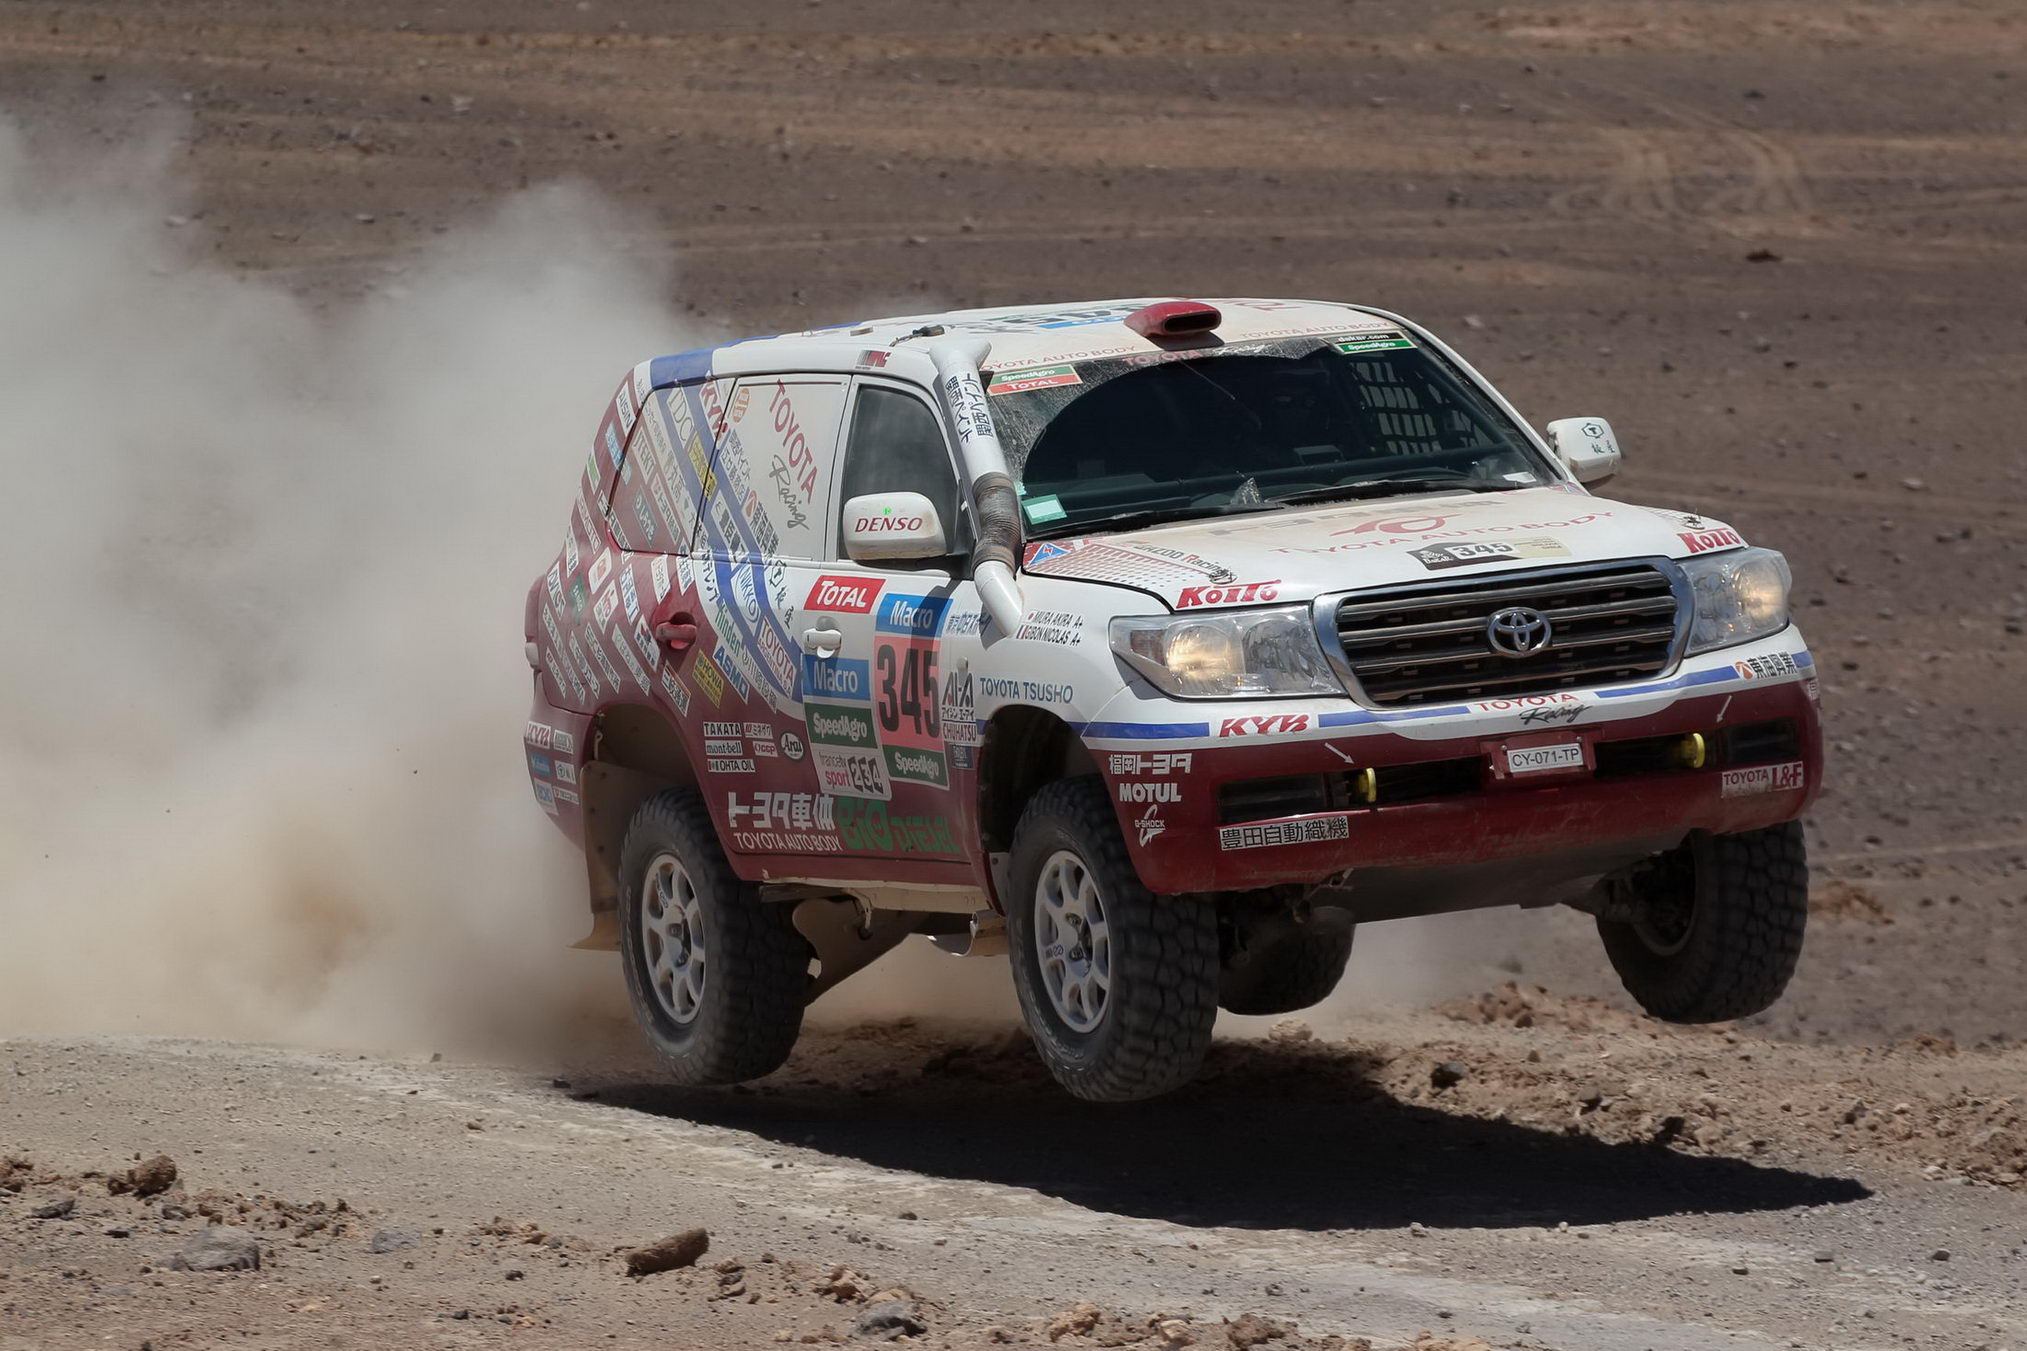 Hilux of Giniel De Villiers (#303 Imperial Toyota) drove aggressively and finished 2nd in the stage A total of four Hiluxes finished in the top 10 today